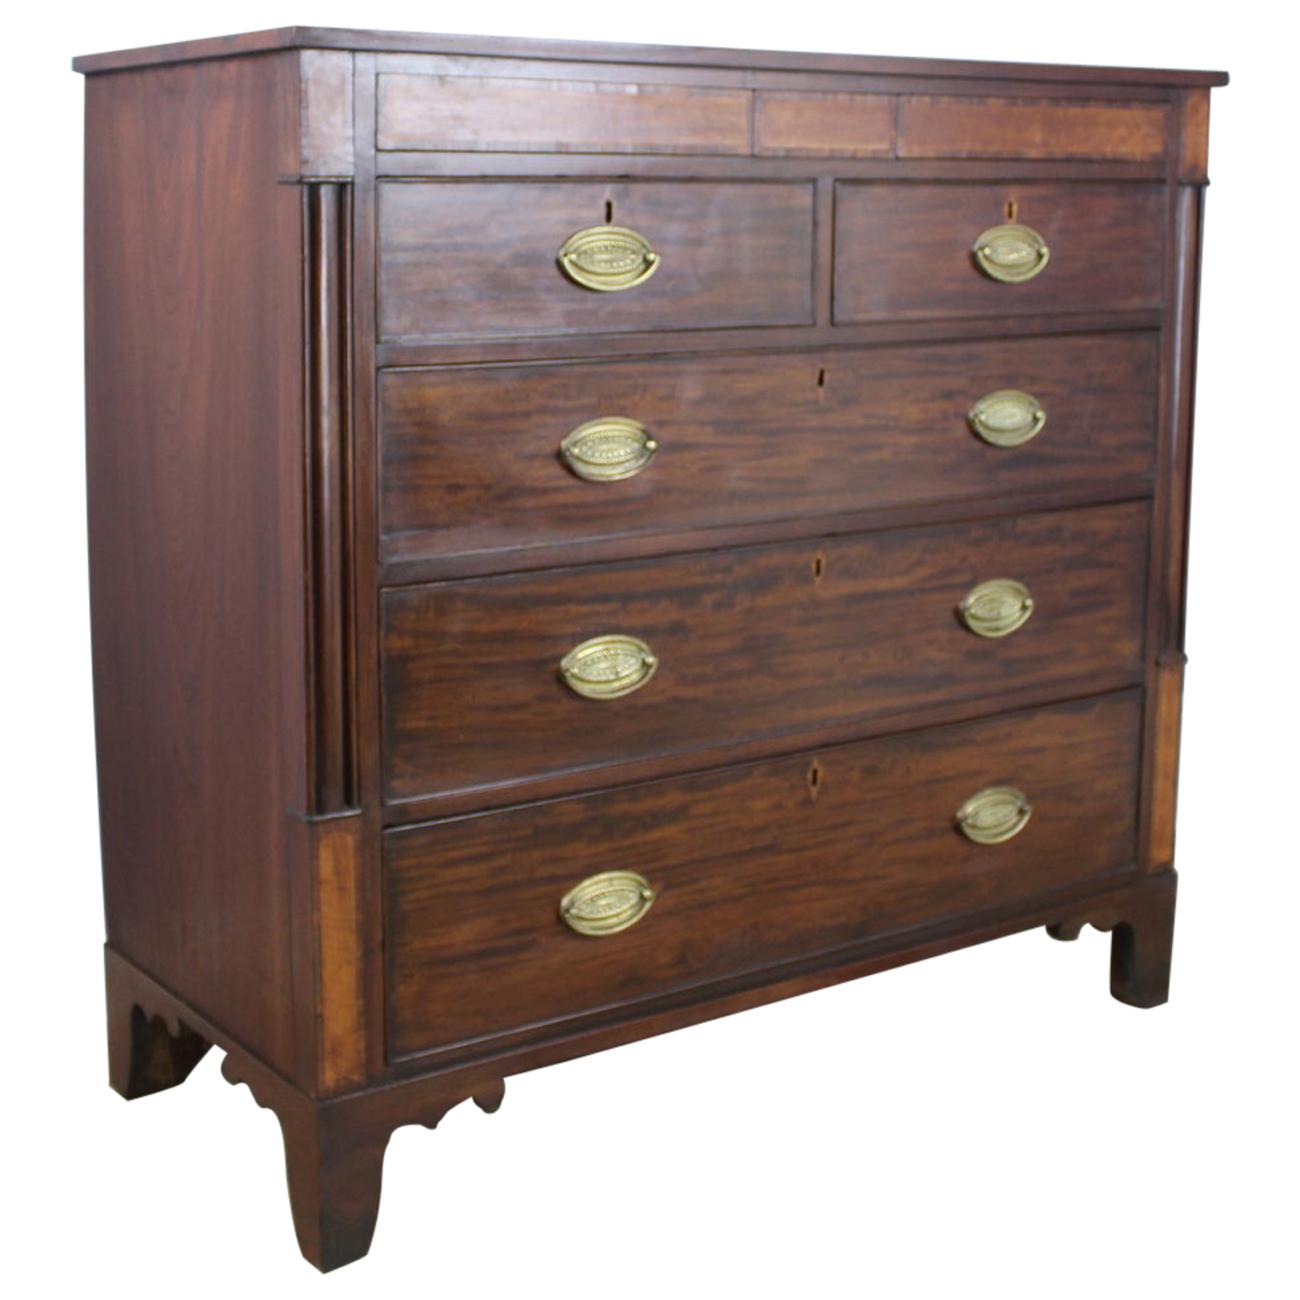 Early Mahogany Chest of Drawers, Satinwood Inlay, Secret Drawers on Top Frieze For Sale